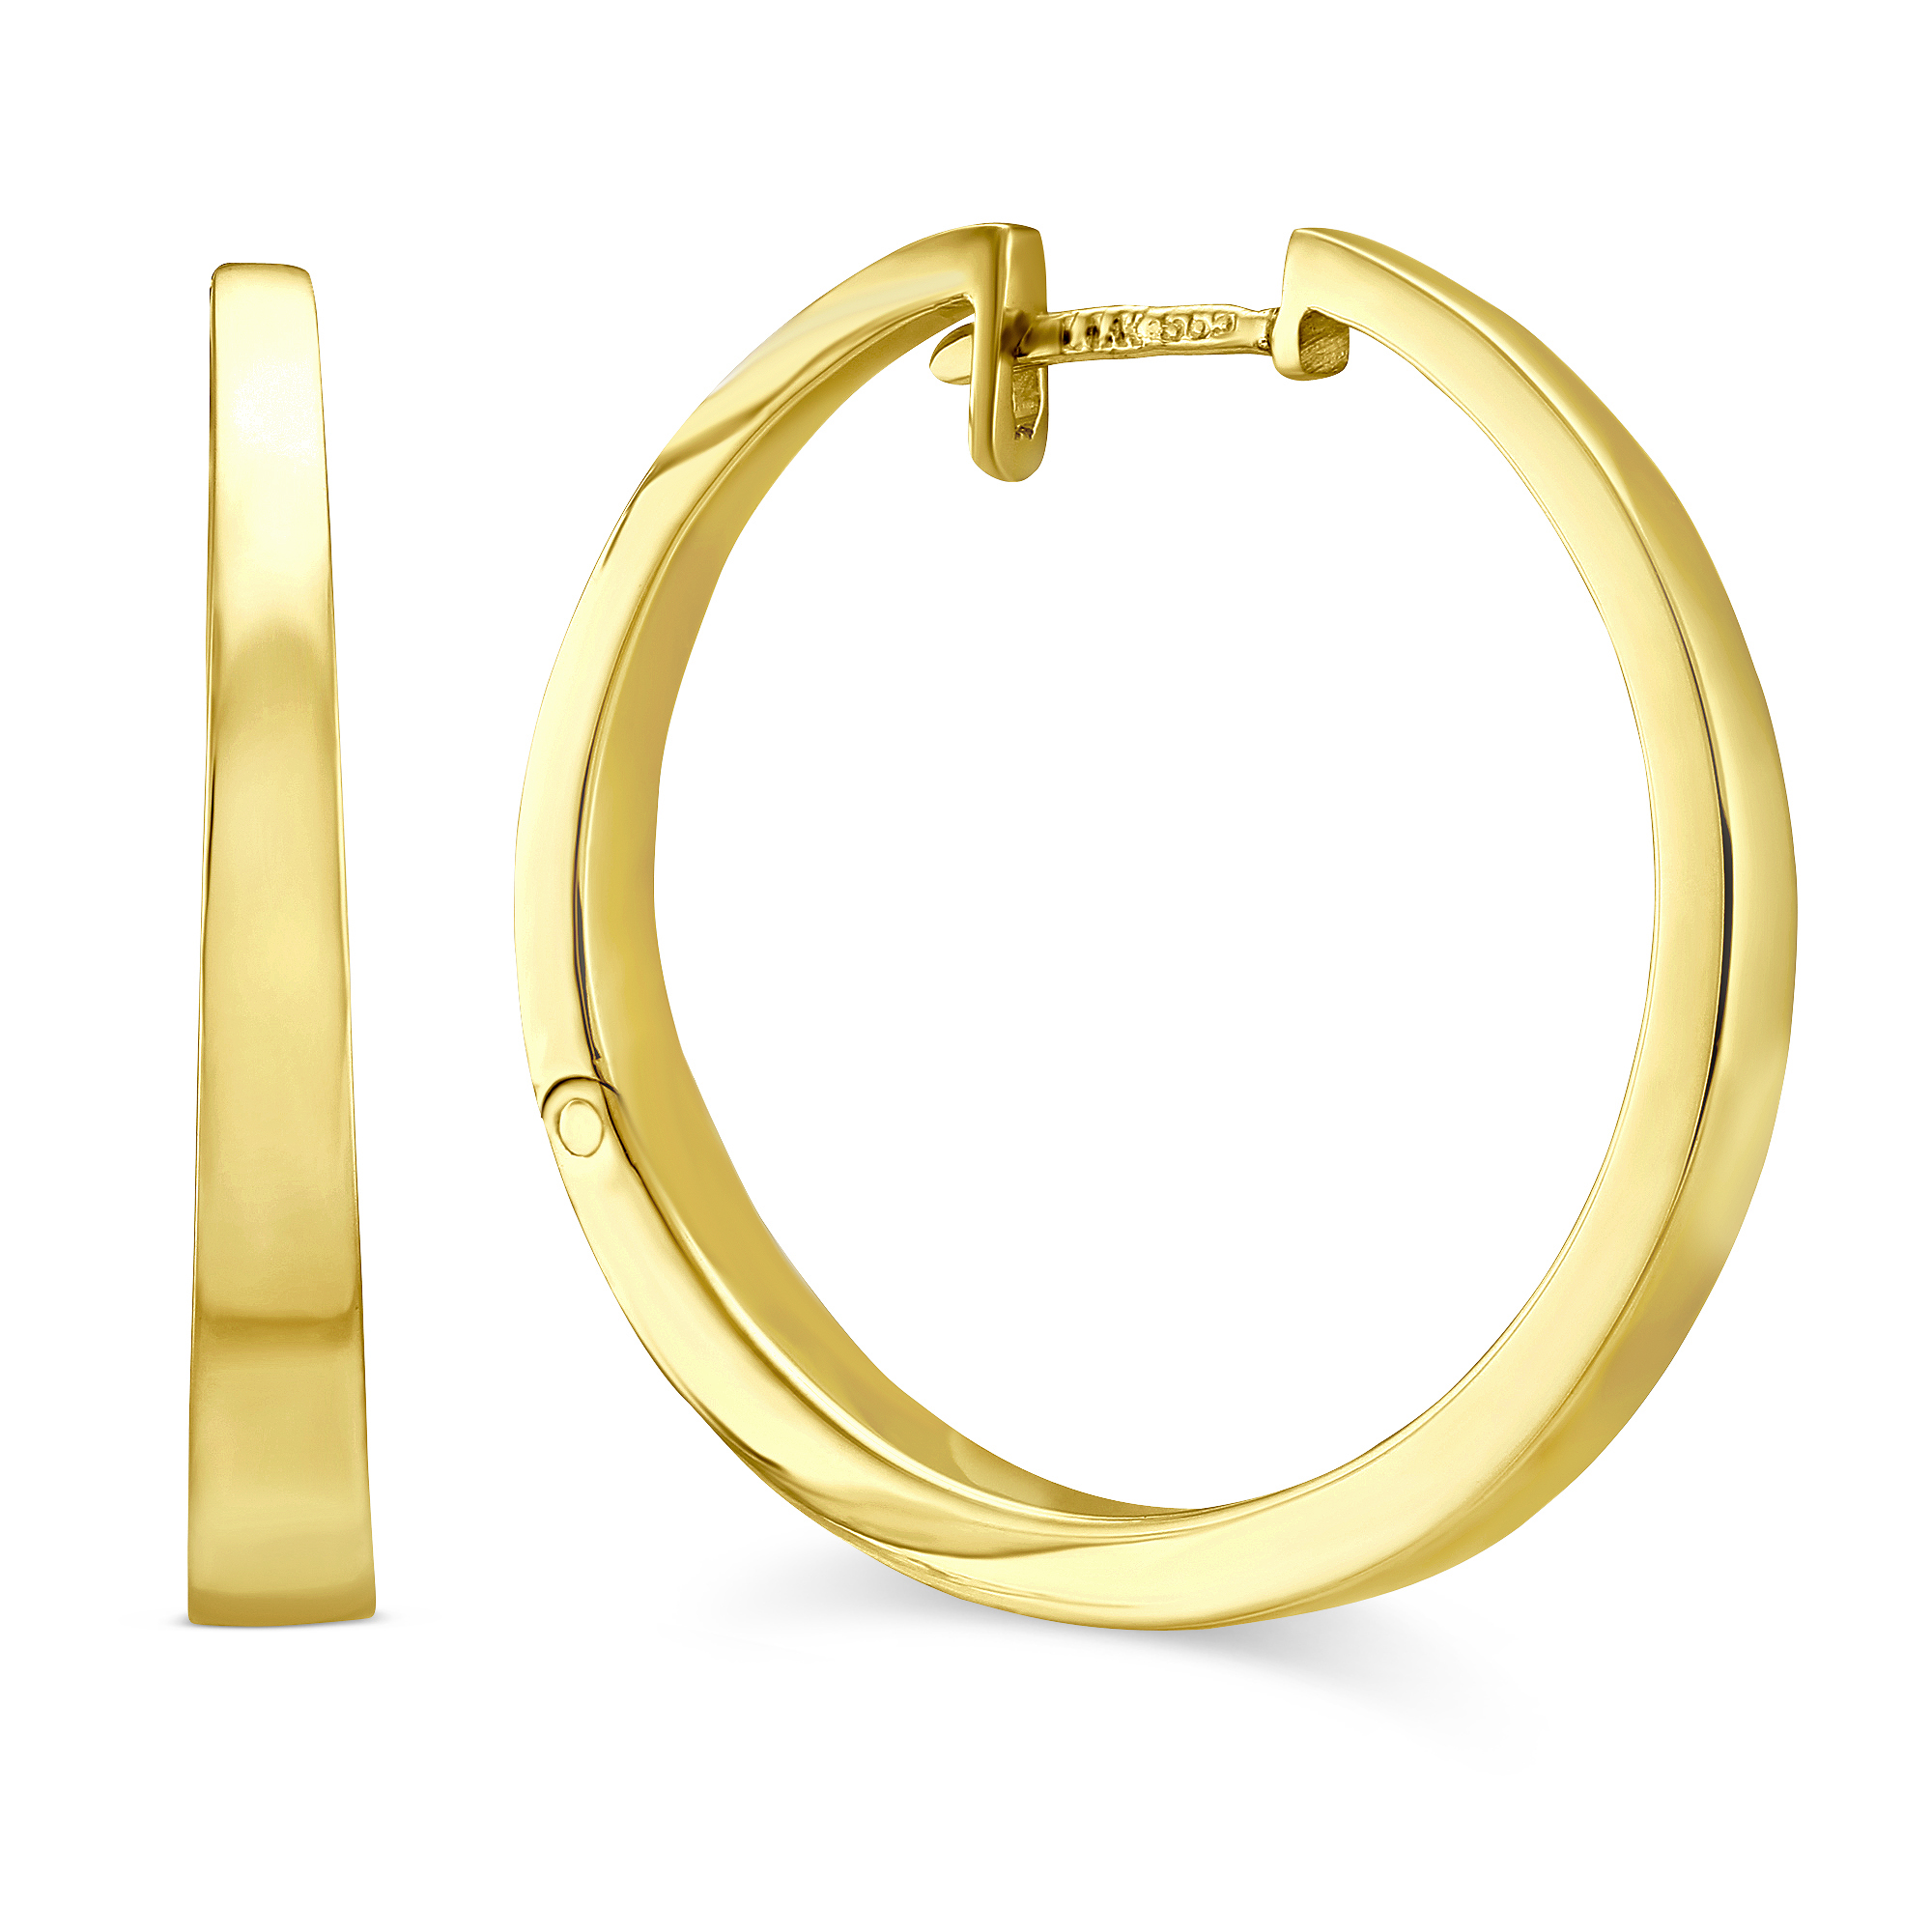 14K Yellow Gold Round Tapered Hoop Earrings | Borsheims